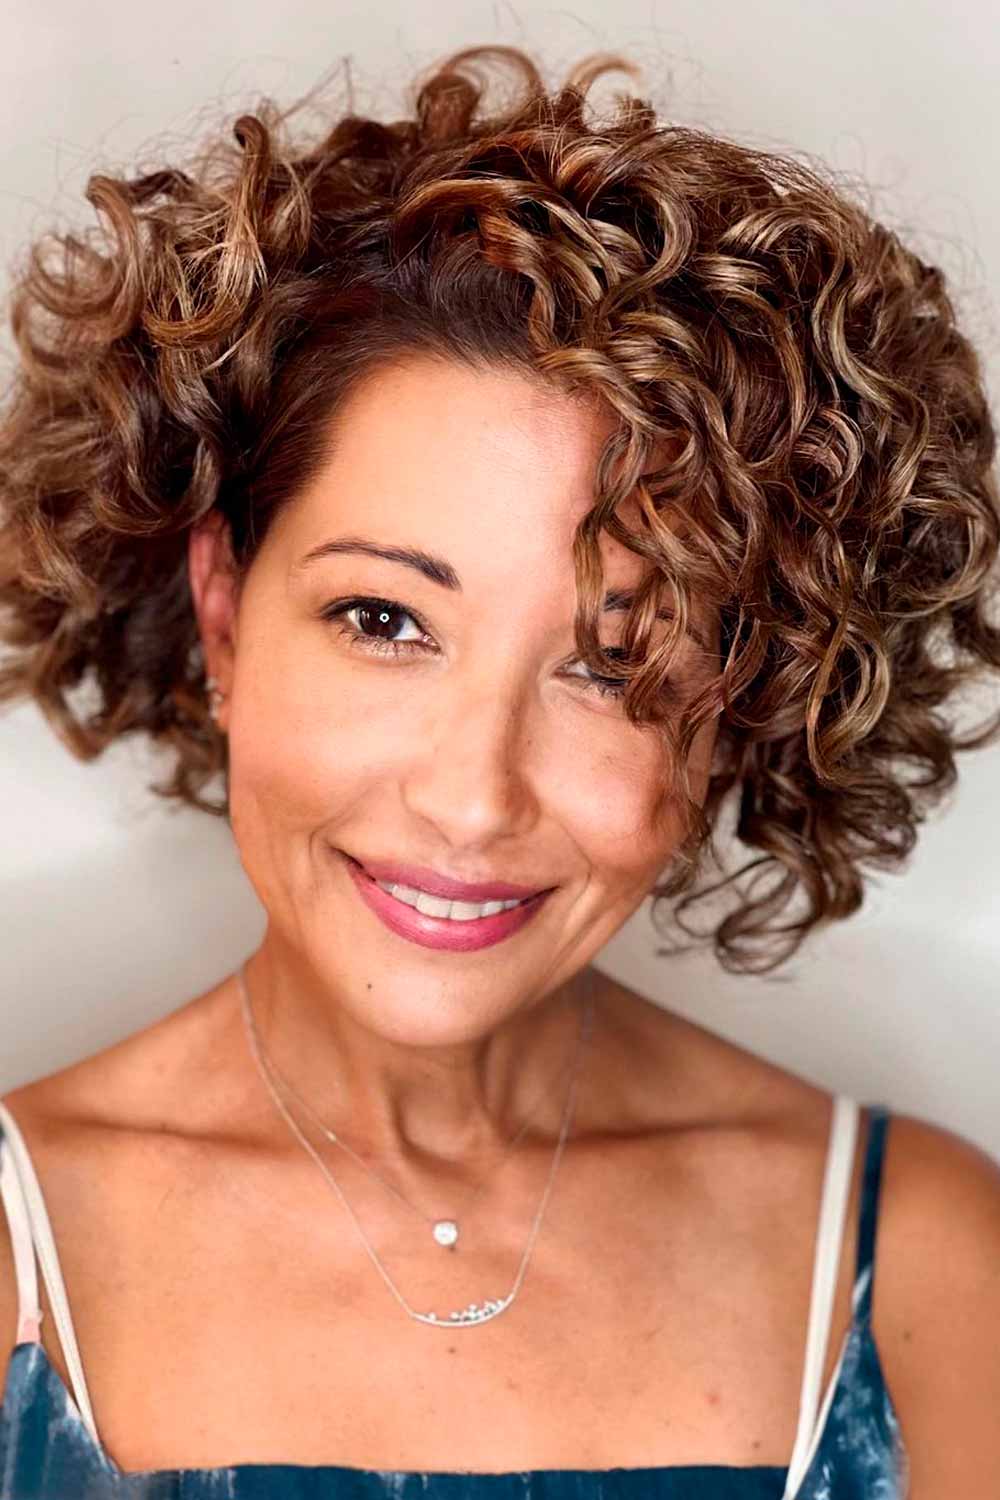 A-line Messy Curly Bob #curlybob #haircuts #bobhaircuts #curlyhairstyles